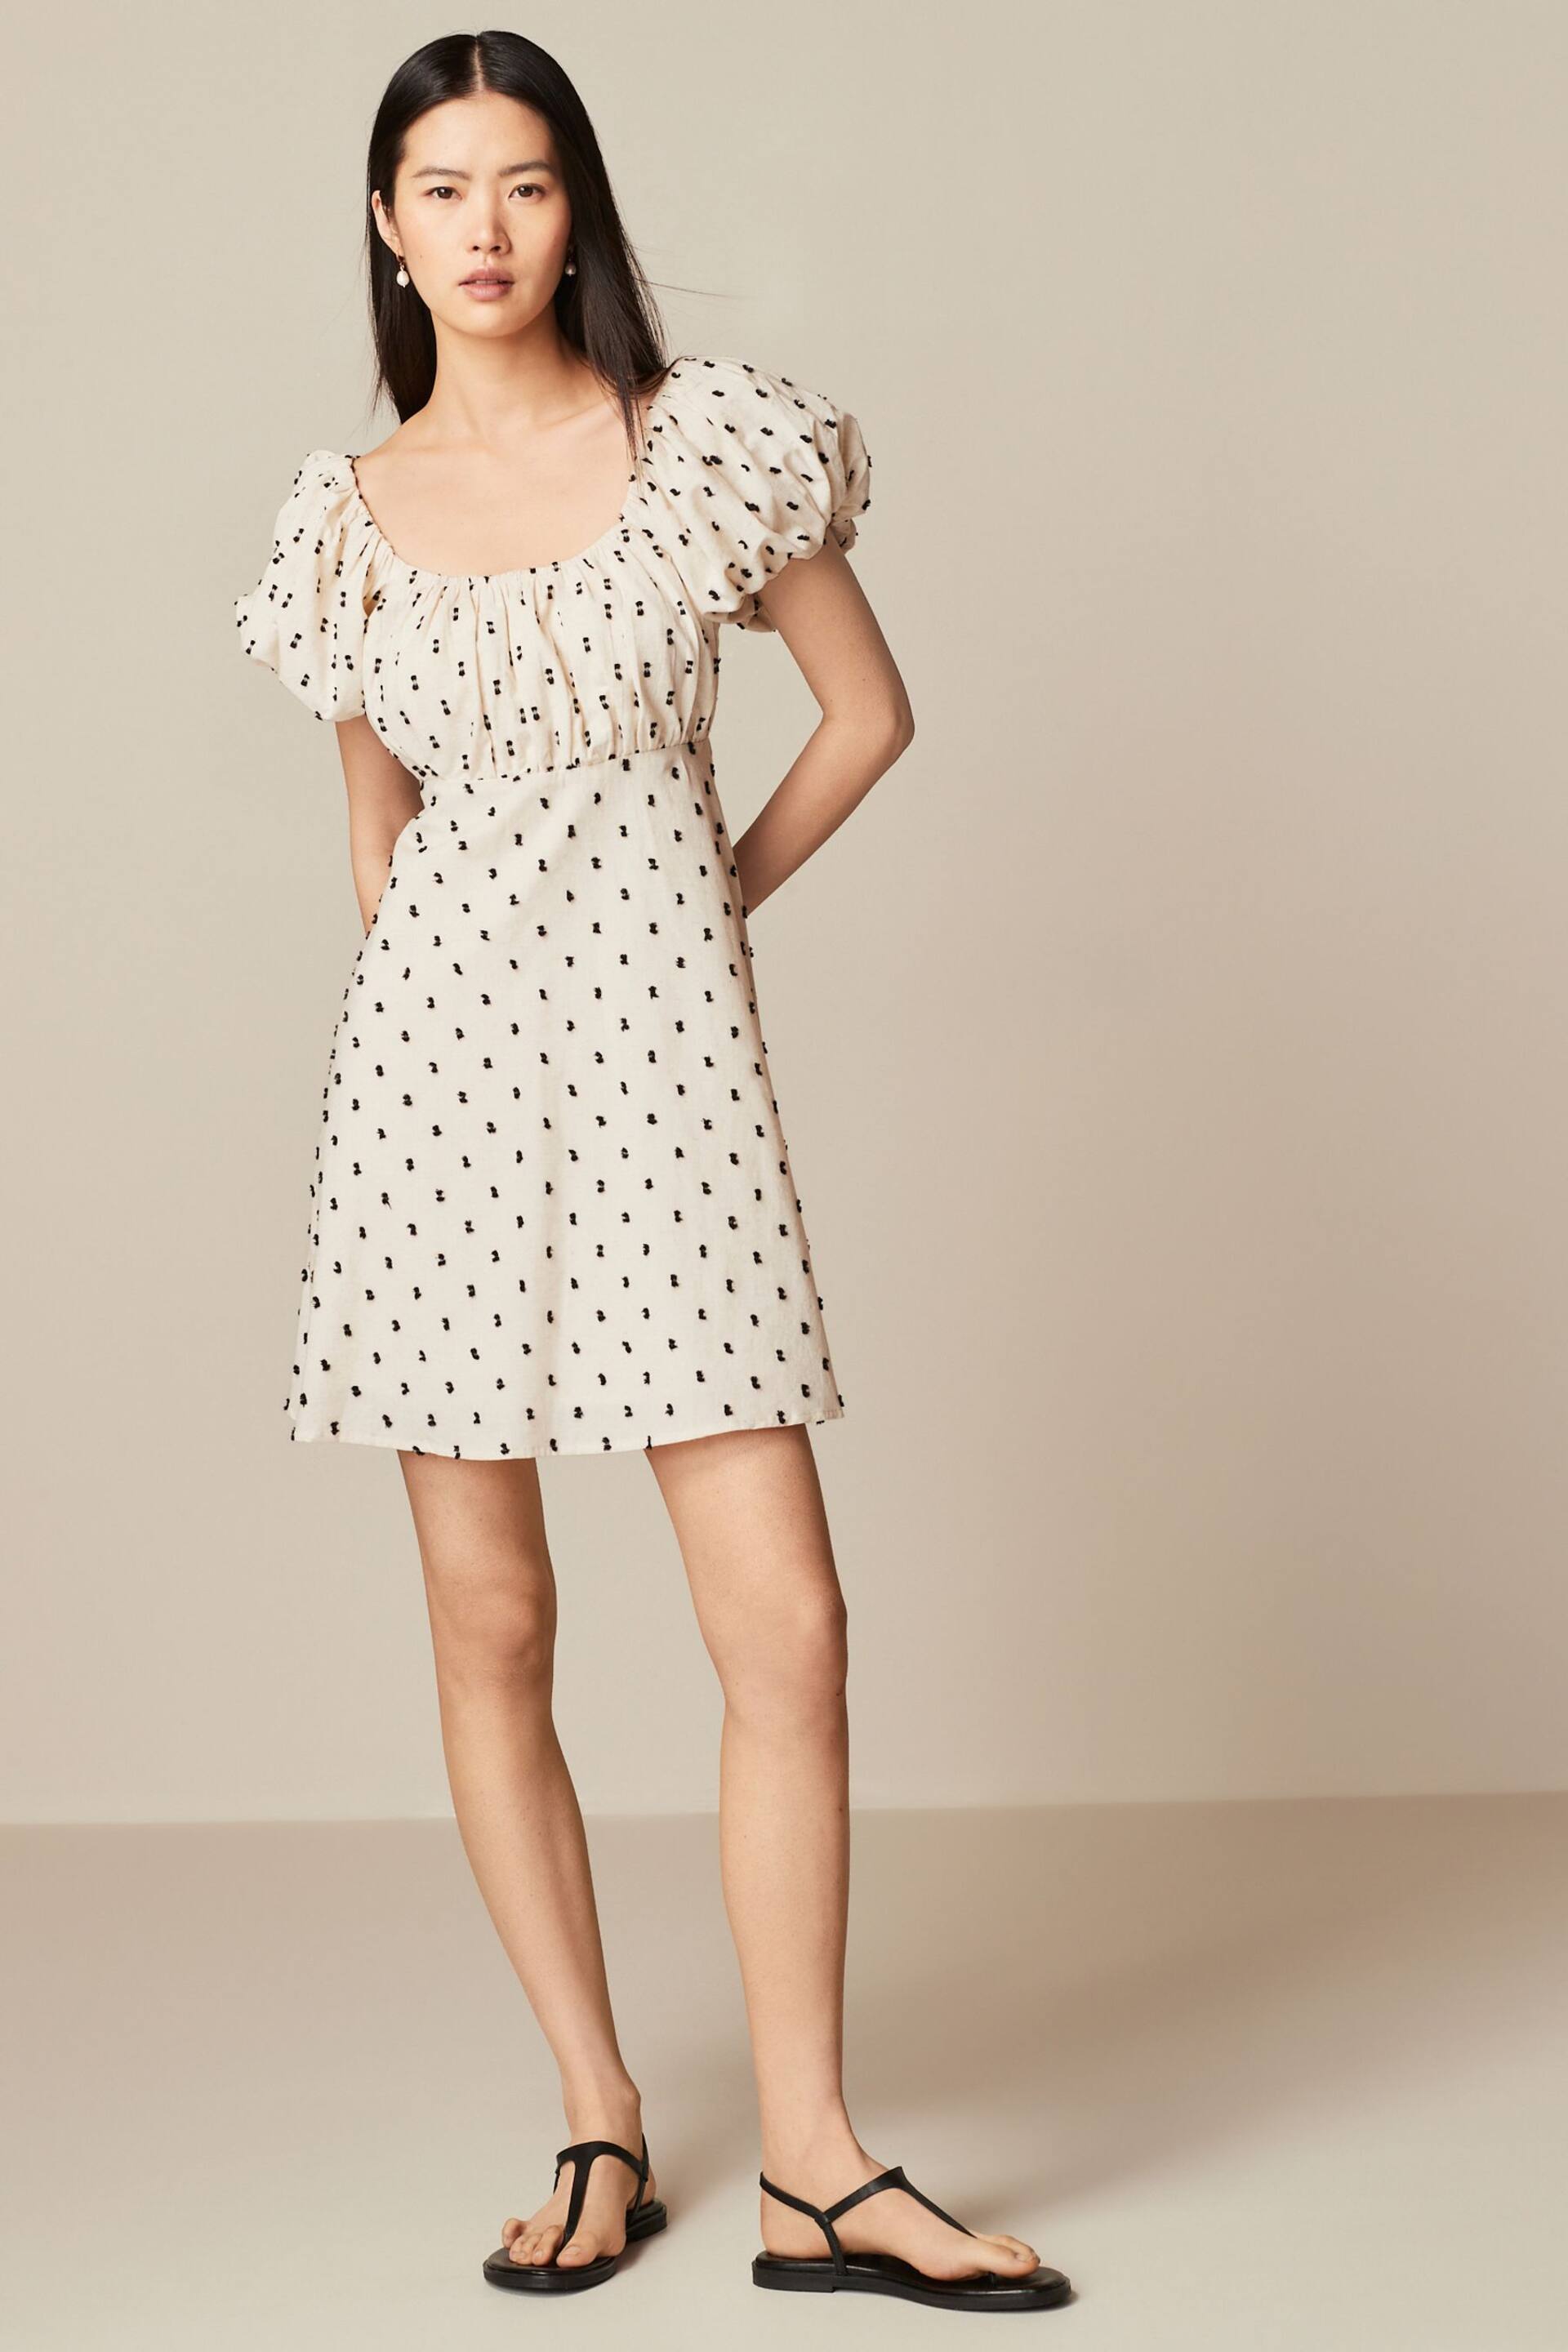 Neutral/Black Polka Dot Mini Puff Sleeve Ruched Front Dress - Image 1 of 6